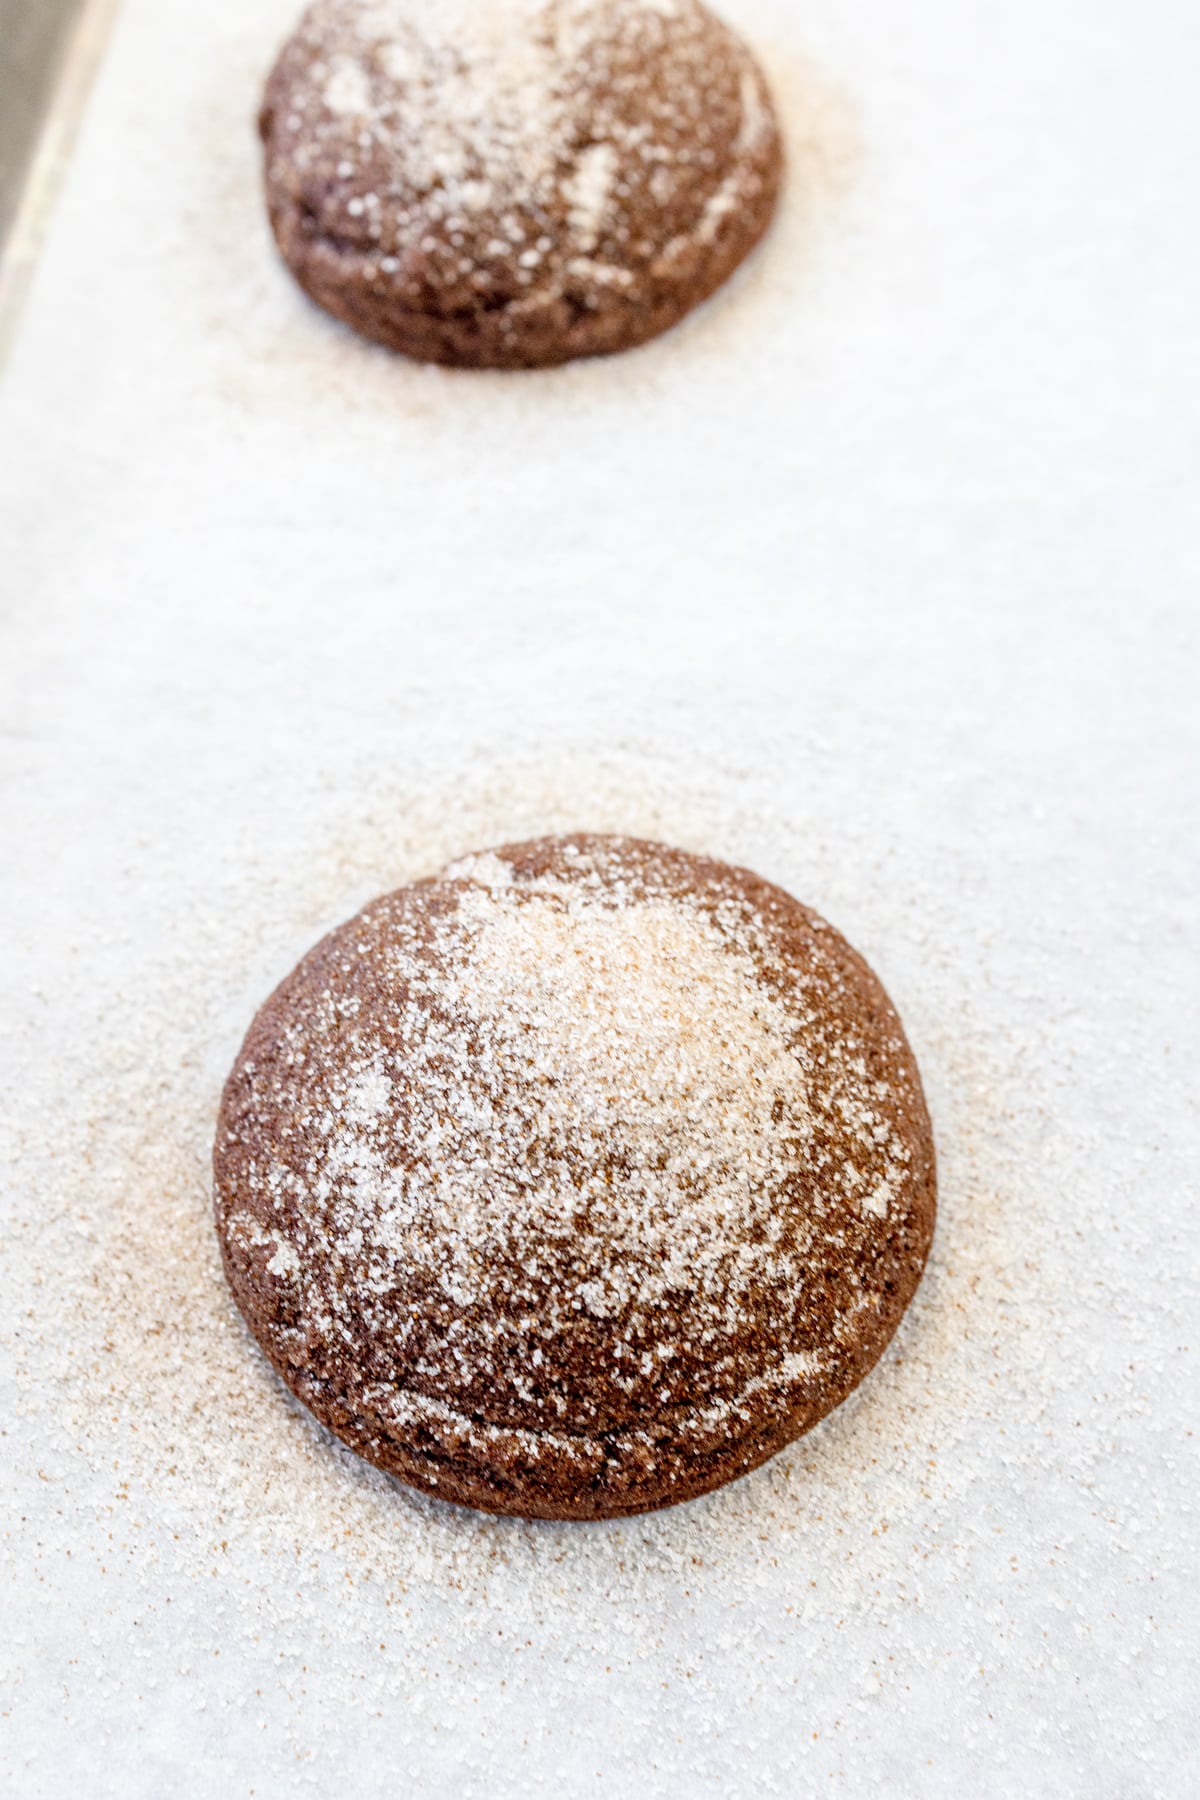 Close up of a chocolate cookie with cinnamon sugar on it on parchment paper on a baking tray.